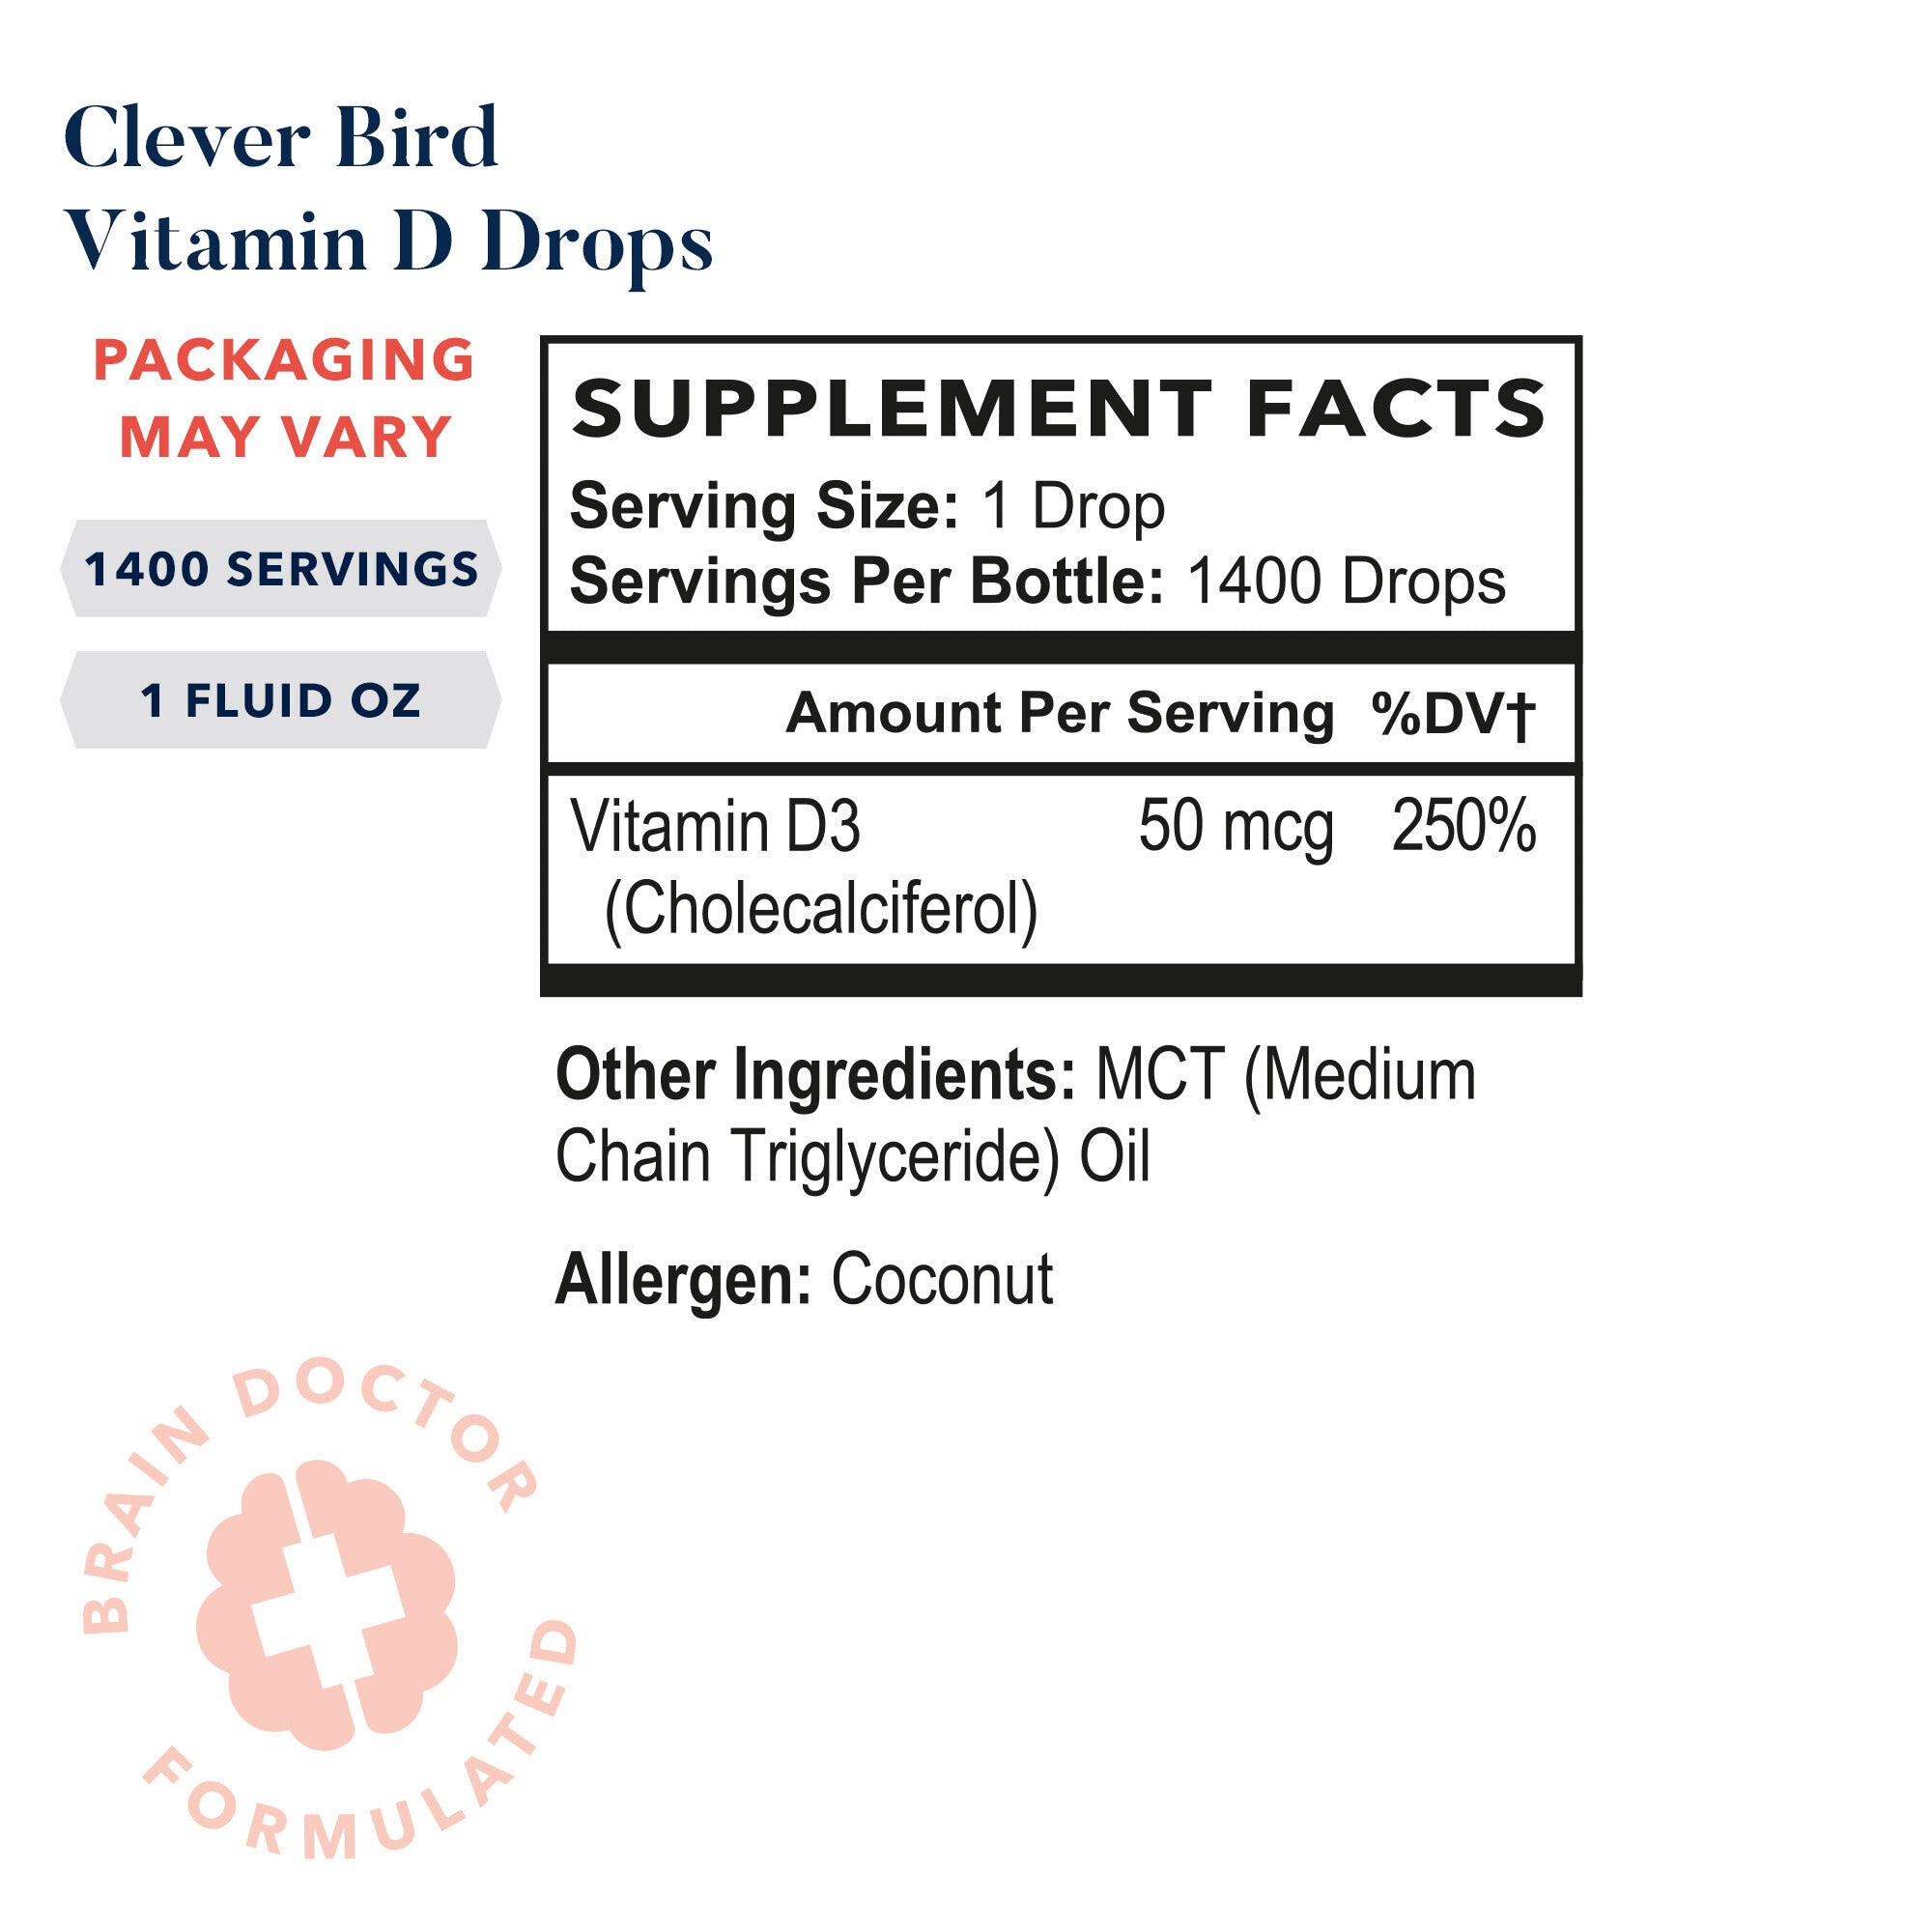 Clever Bird Vitamin D drops label with suplement facts, ingredients and allergen information